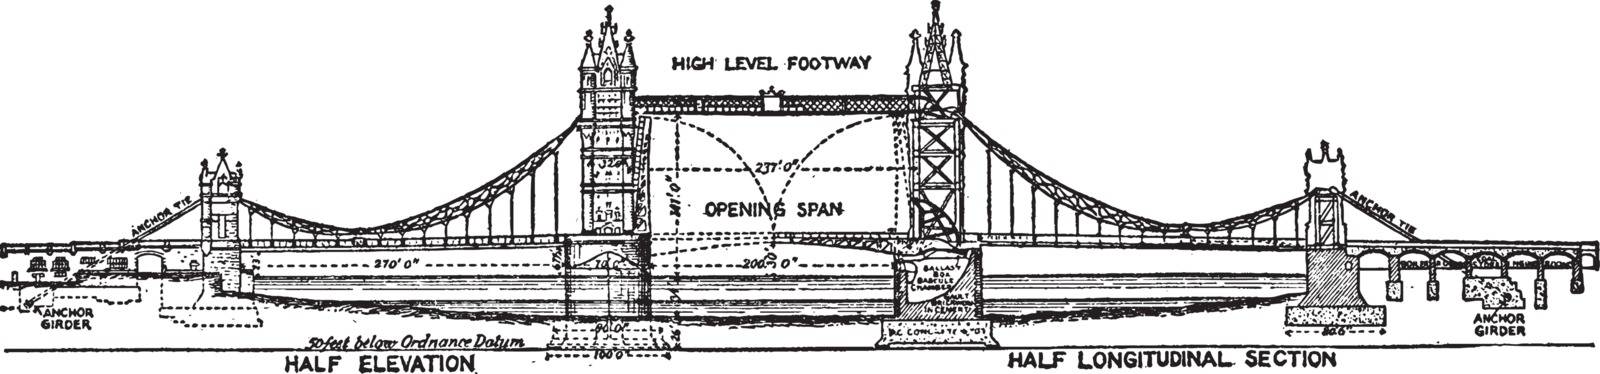 Tower Bridge is a combined bascule and suspension bridge in London built between 1886 and 1894, vintage line drawing or engraving illustration.